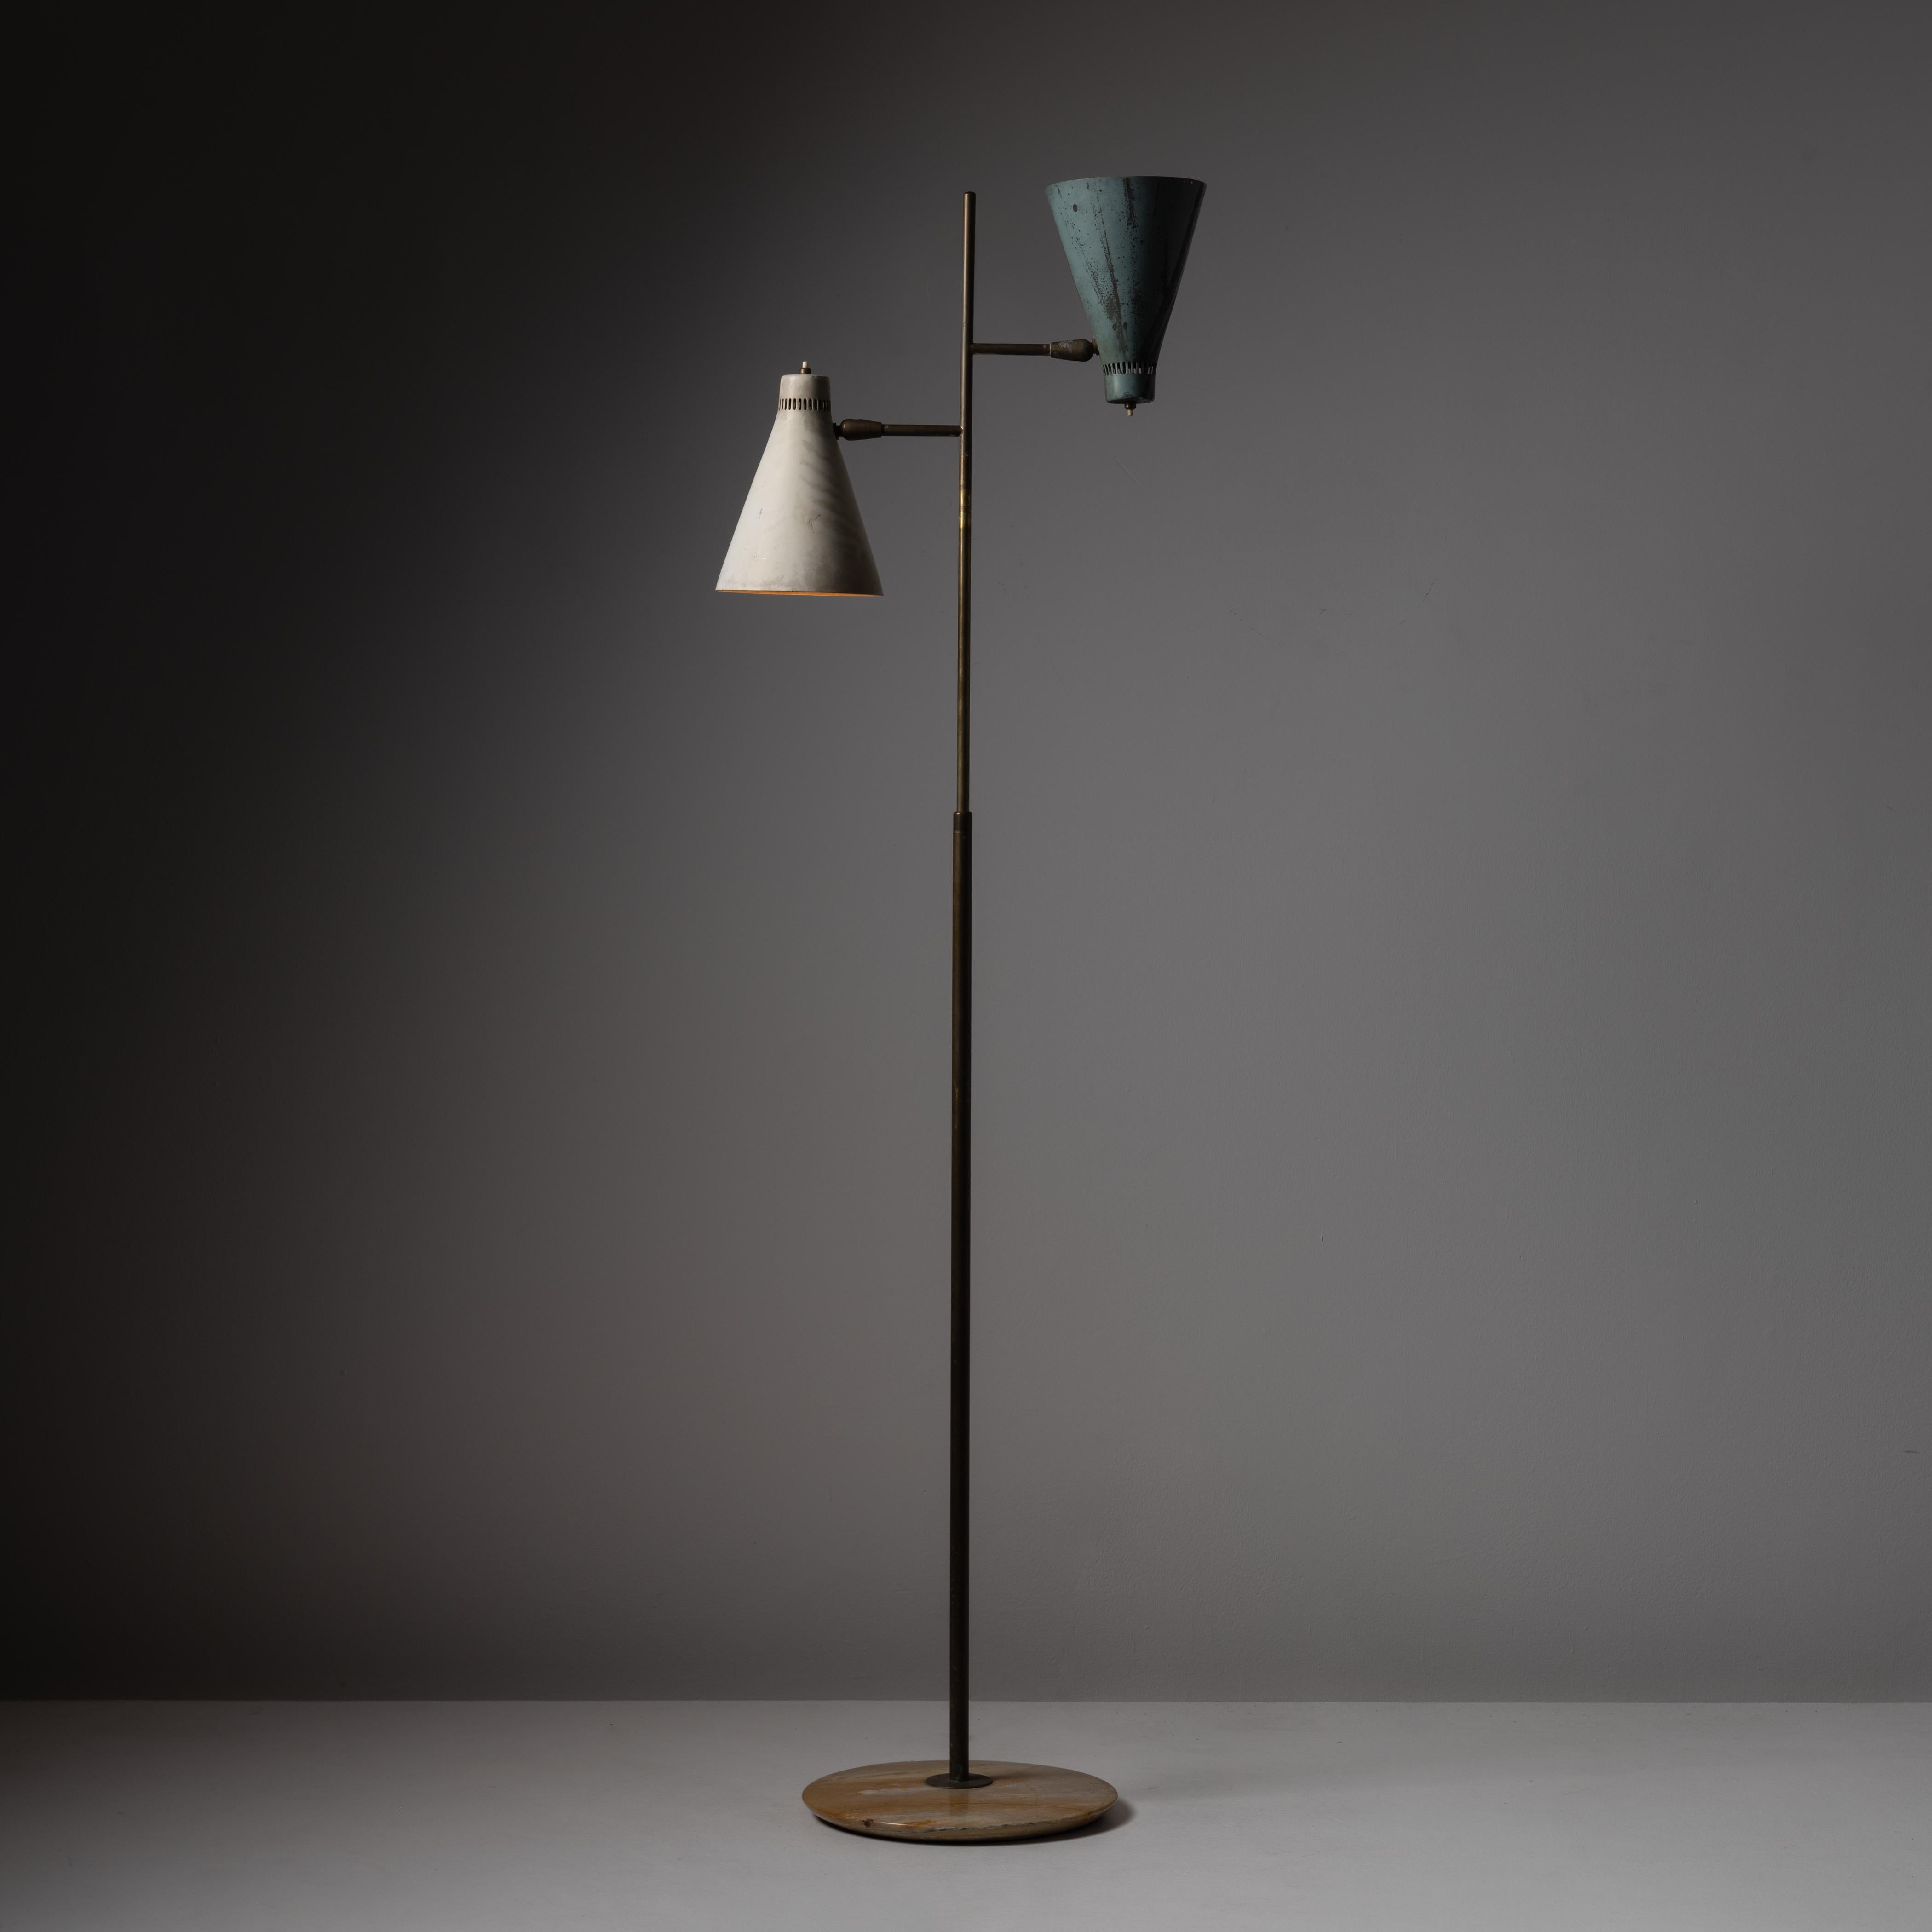 Rare floor lamp Giuseppe Ostuni for Oluce. Designed and manufactured in Italy, circa the 1950s. A dual head floor lamp, with a bone and verde combination of shades, along with a beautiful marble base. Stem hardware is aged brass. The shades are able